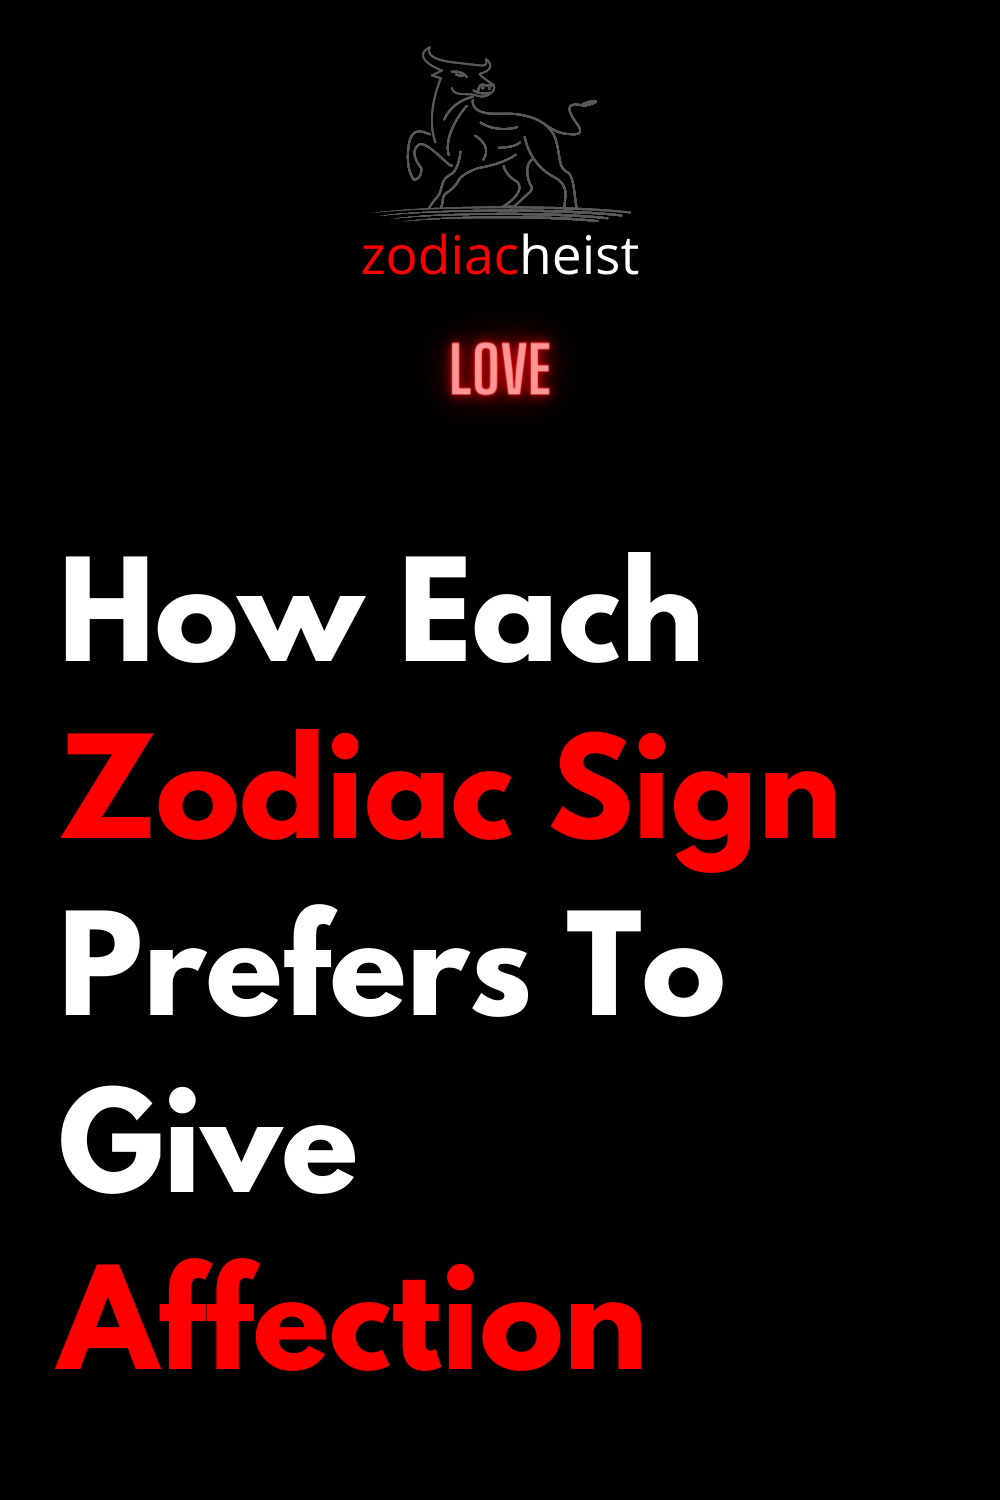 How Each Zodiac Sign Prefers To Give Affection